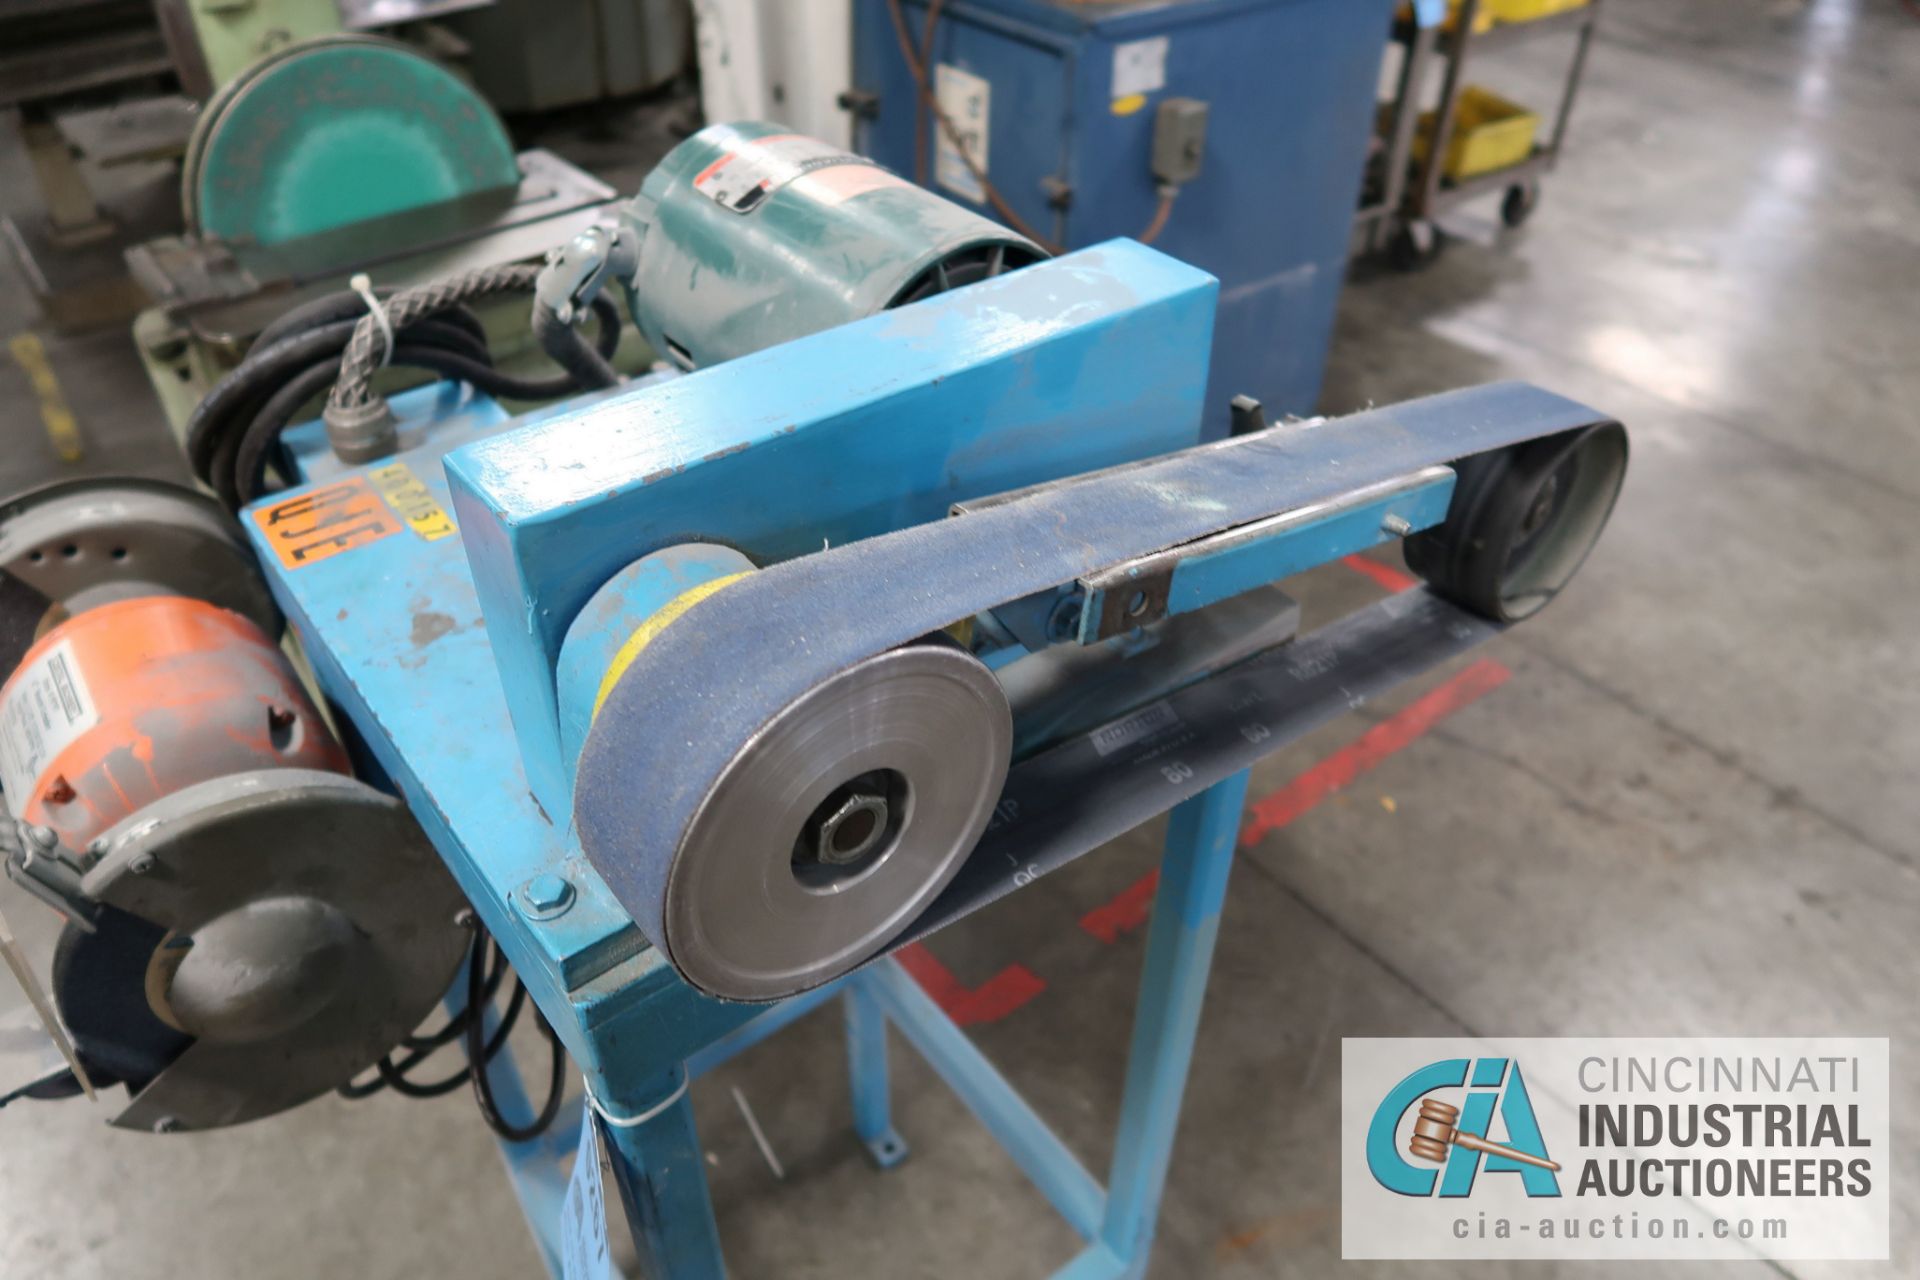 2" BELT SHOP BUILT HORIZONTAL STAND MOUNTED SANDER; ASSET # 400157, WITH 6" CENTRAL MACHINERY DE - Image 4 of 4